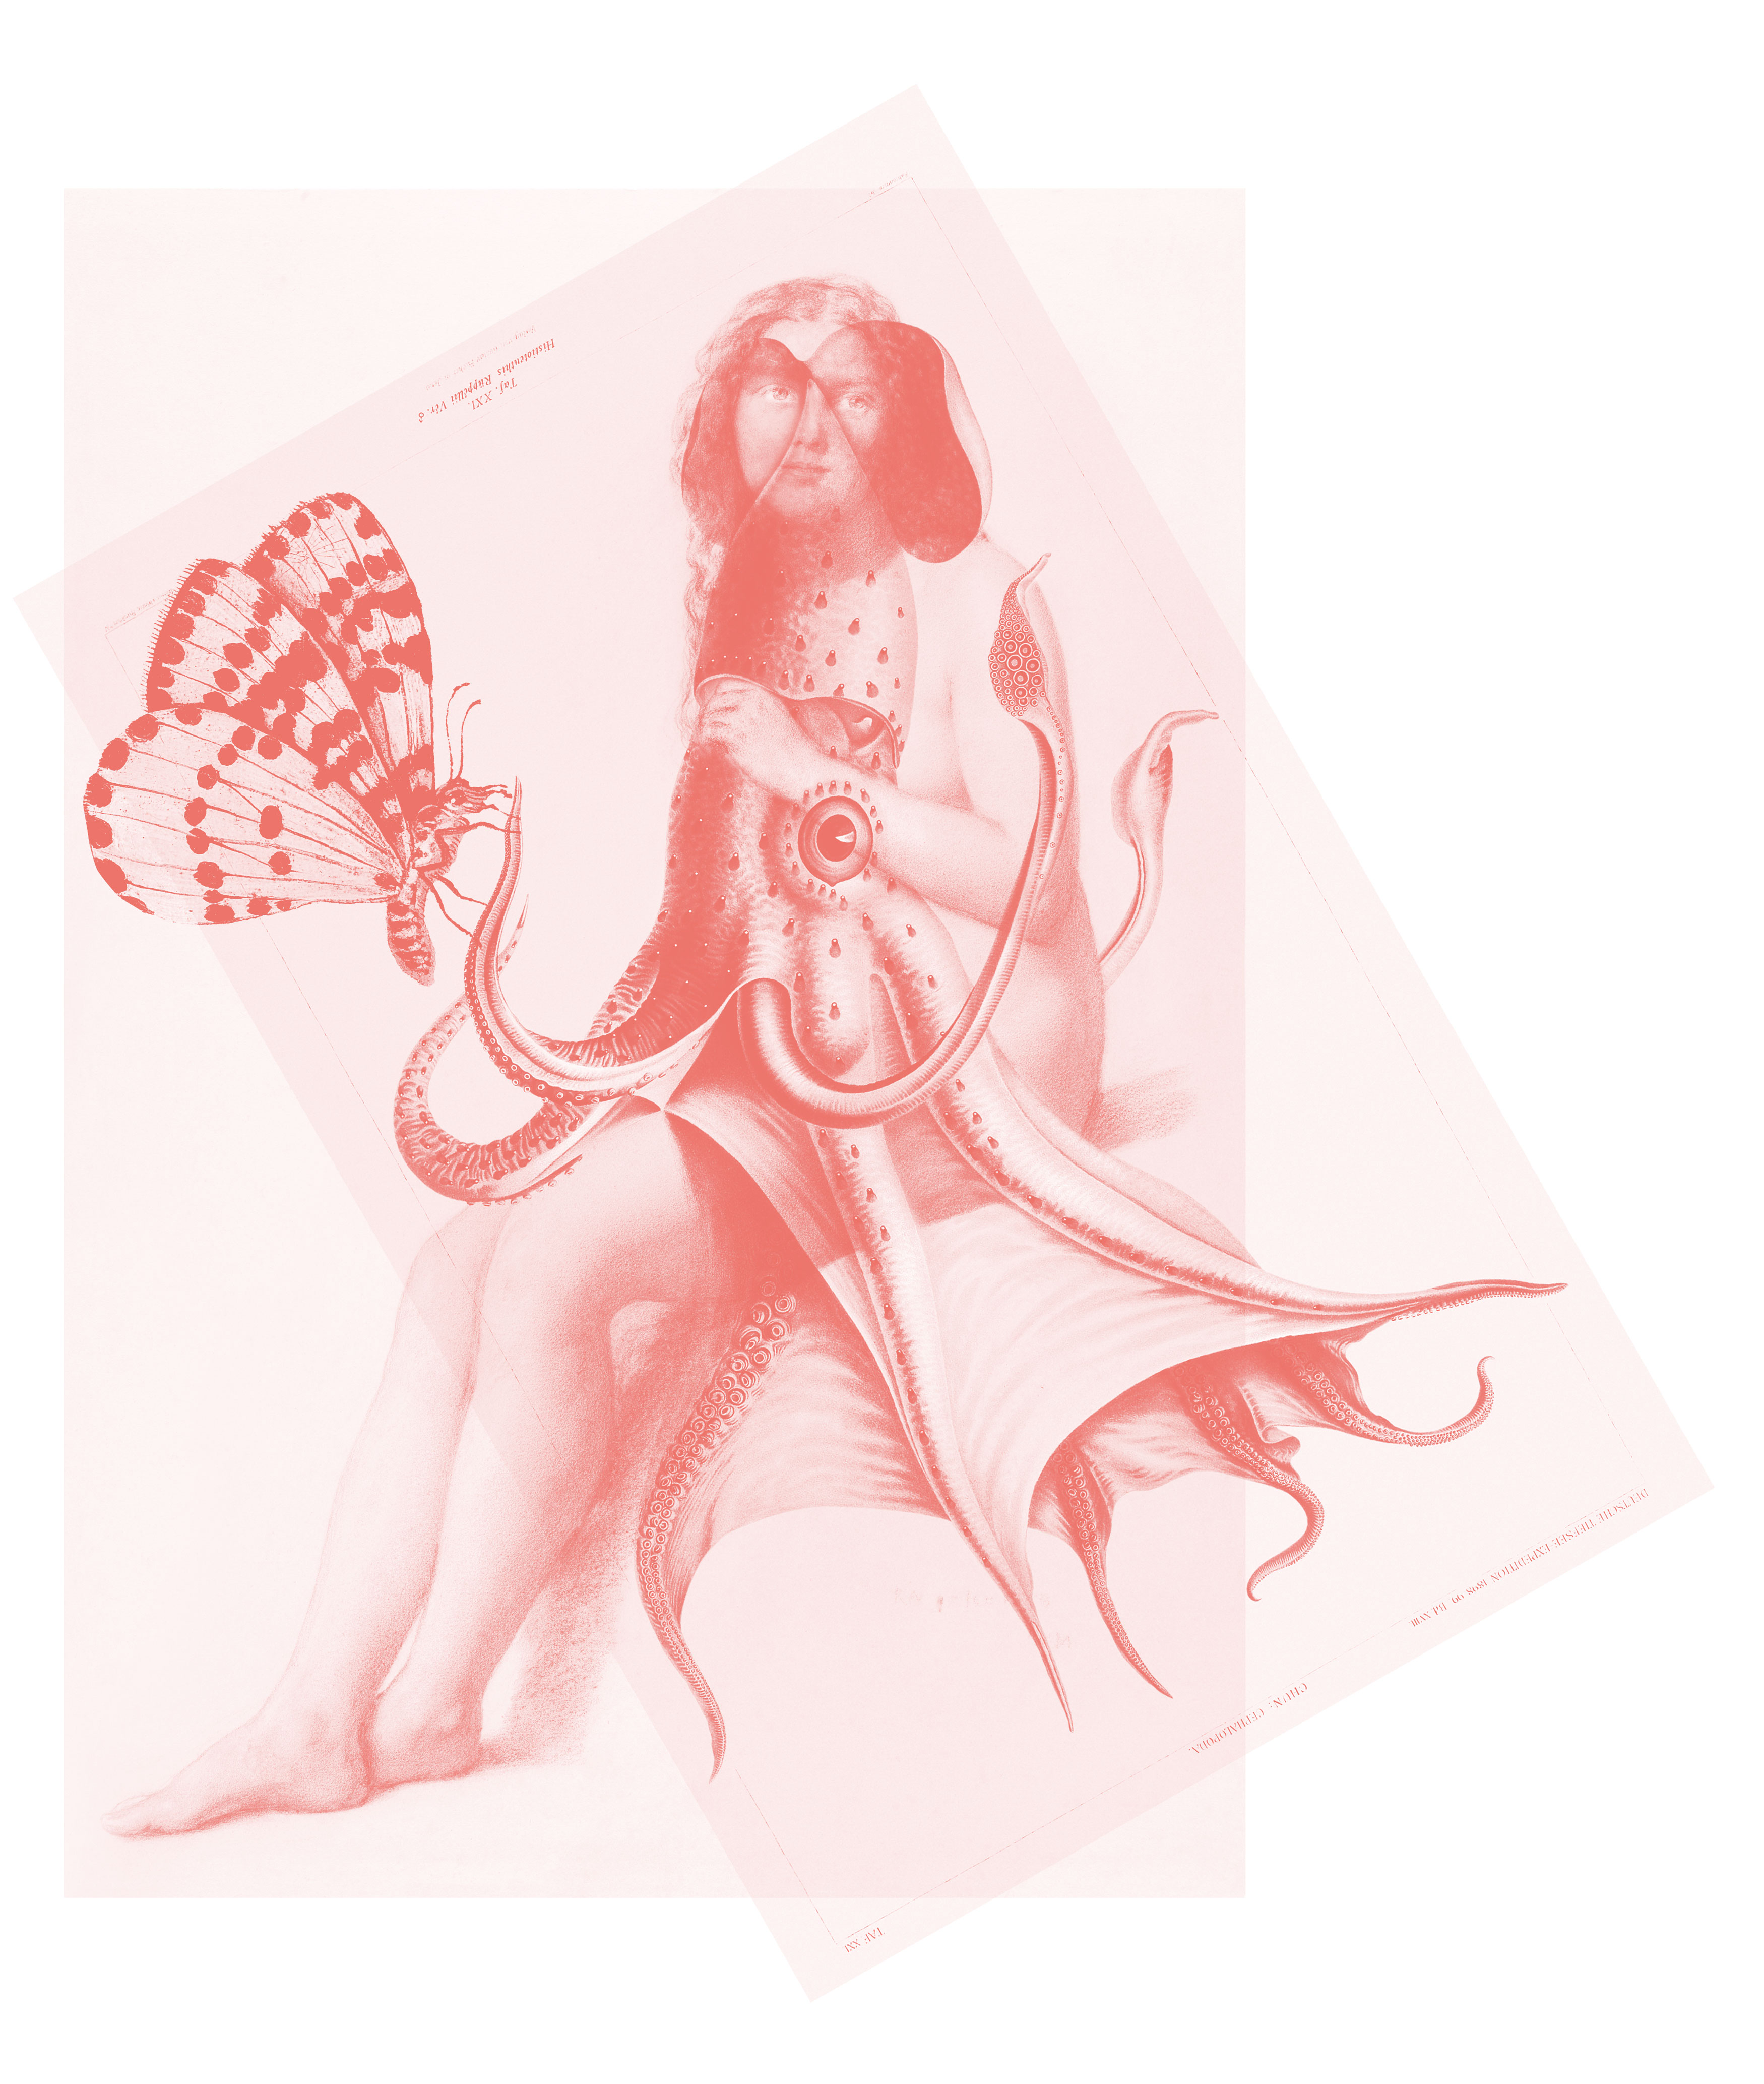 A collage combining images of an octopus and a woman with a butterfly